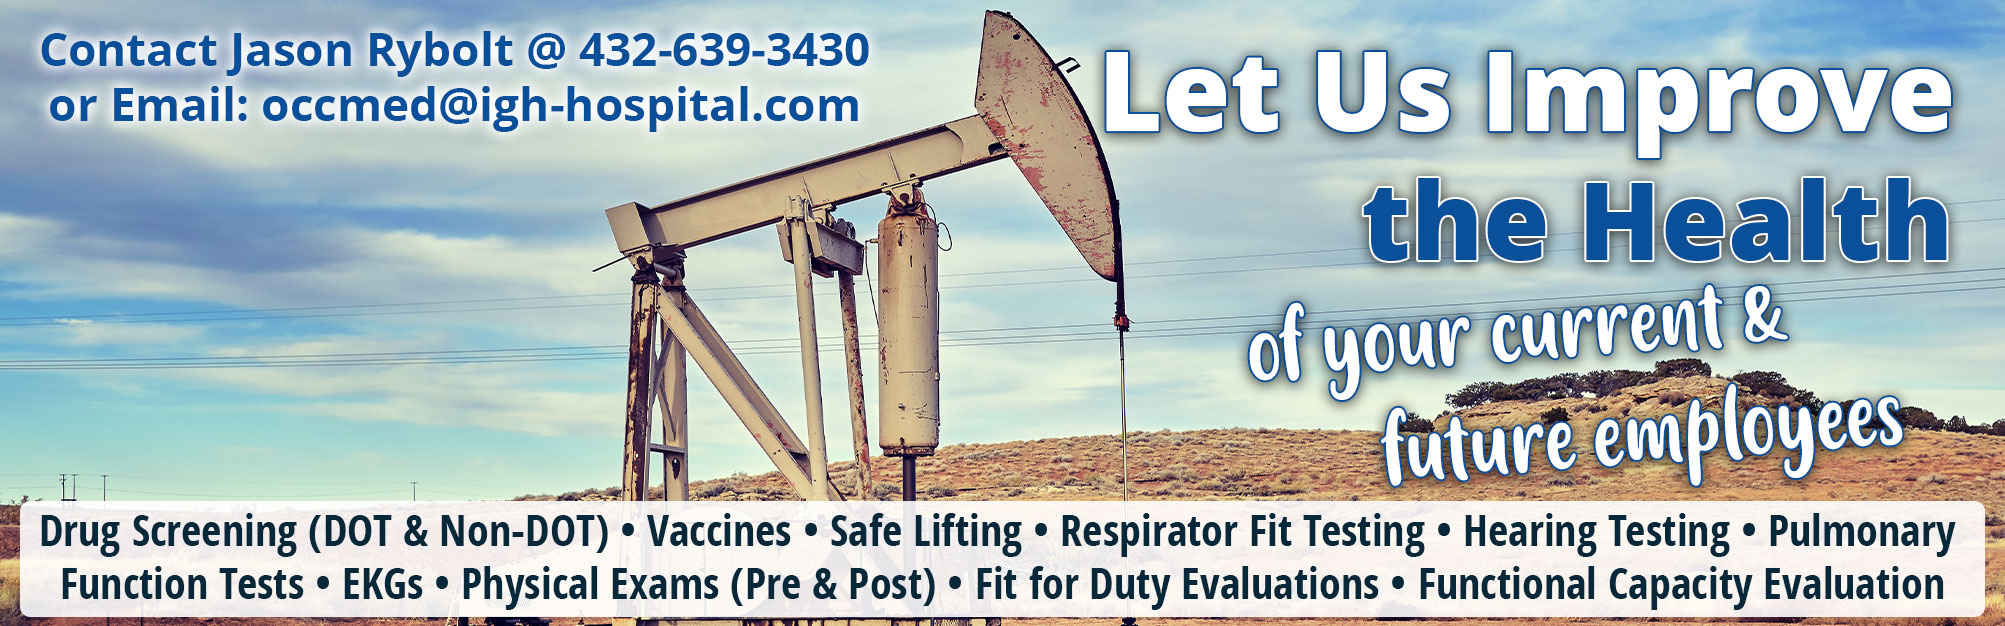 Let Us Improve the Health of your current & future employees

Drug Screening (DOT & Non-DOT) * Vaccines *Safe Lifting *Respirator Fit Testing *Hearing Testing *Pulmonary Function Tests *EKGs *Physical Exams (Pre & Post) * Fit for Duty Evaluations * Functional Capacity Evaluation 

Contact Jason Rybolt @ 432-639-3430 or Email: occmed@igh-hospital.com